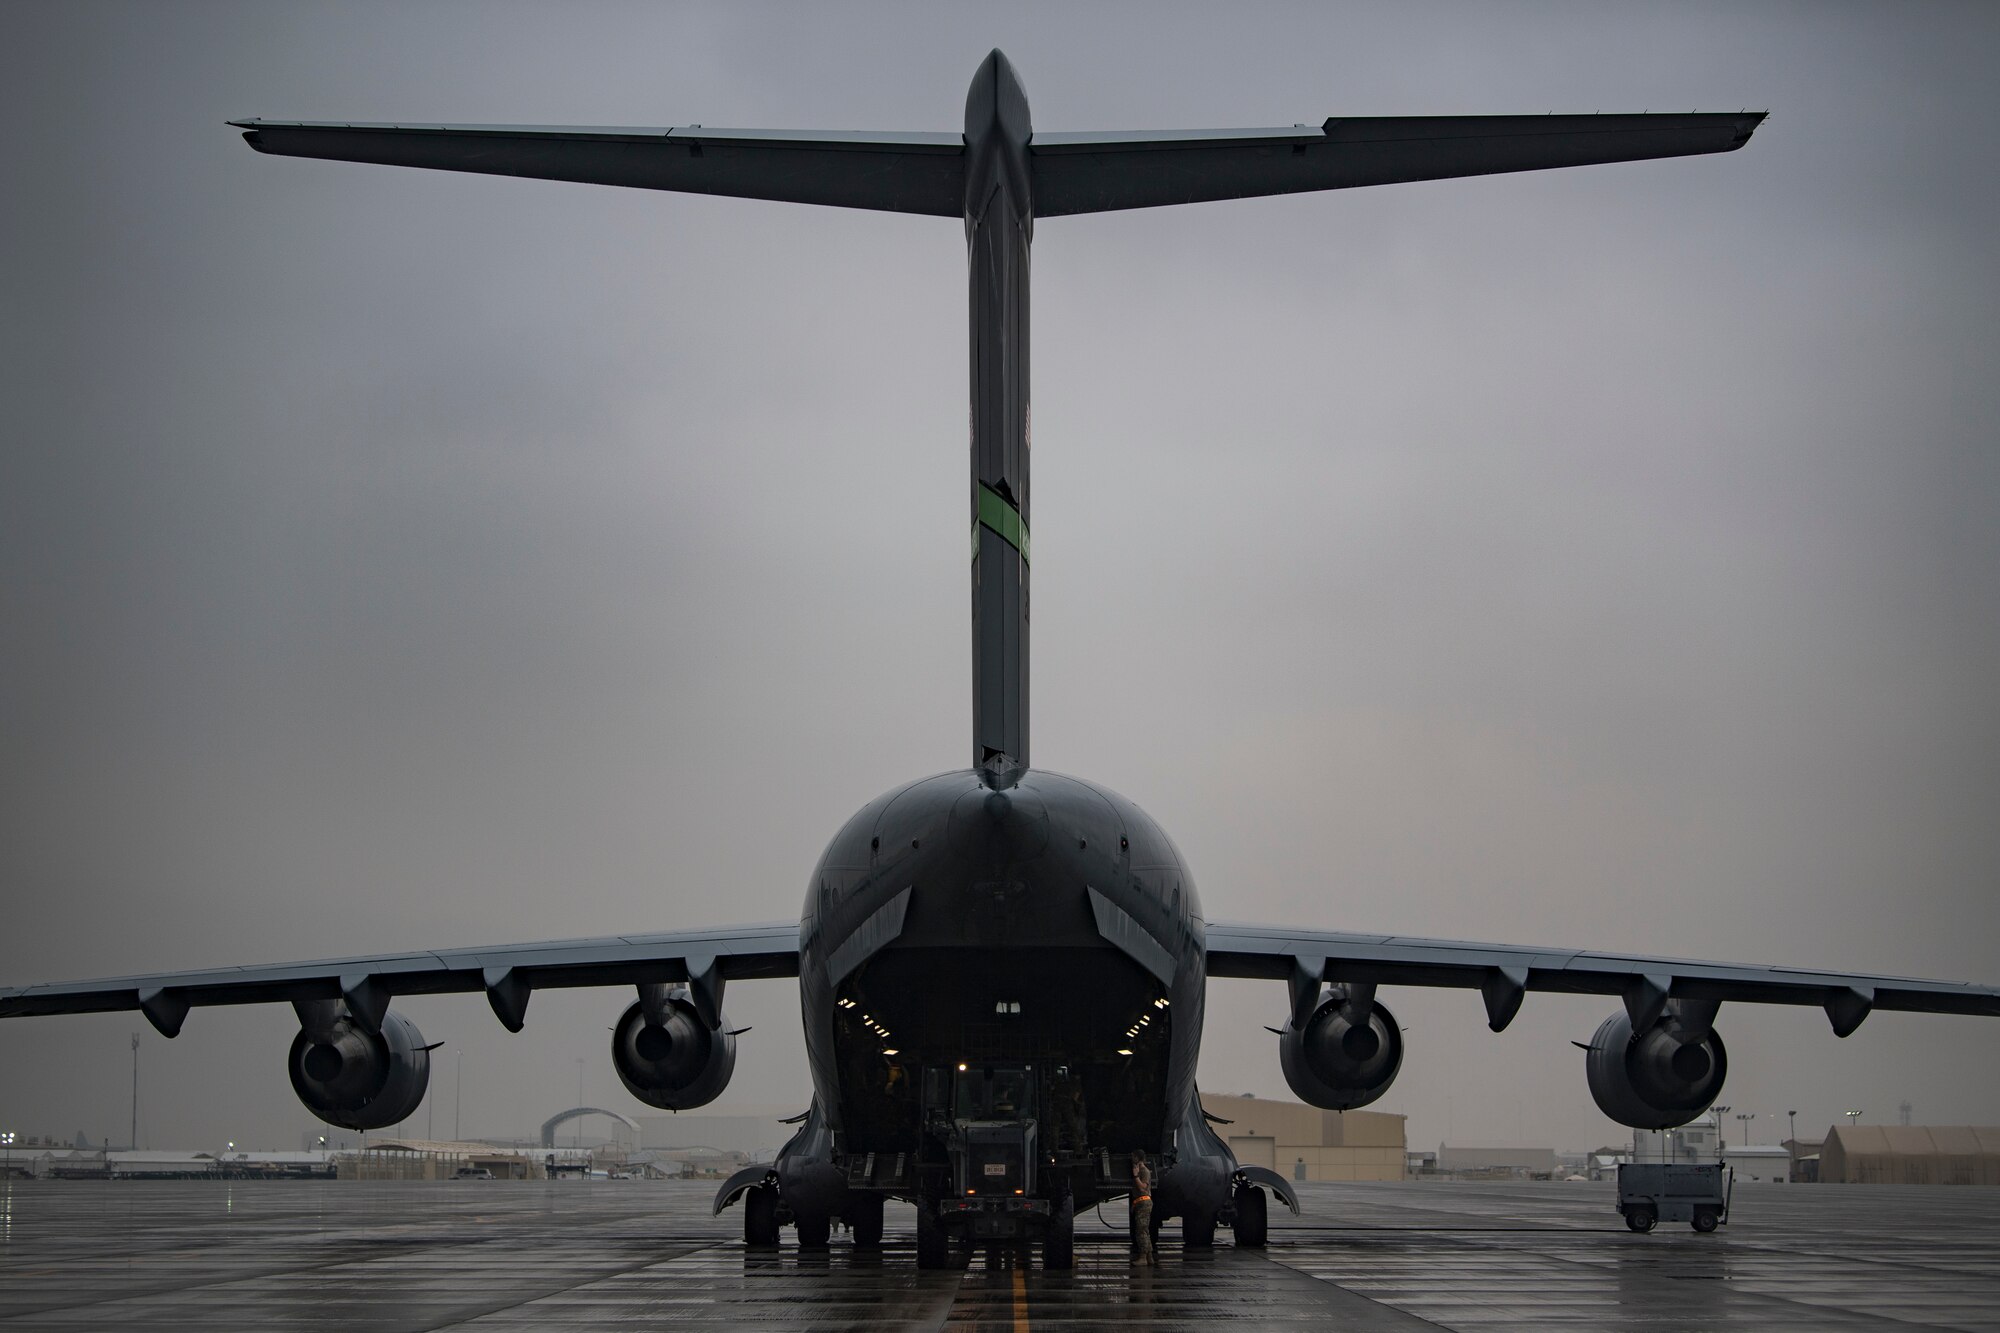 U.S. Air Force Airmen assigned to 746th Expeditionary Logistics Readiness Squadron load cargo into a C-17 Globemaster III assigned to the 816th Expeditionary Airlift Squadron at Al Udeid Air Base, Qatar, Jan. 10, 2020.